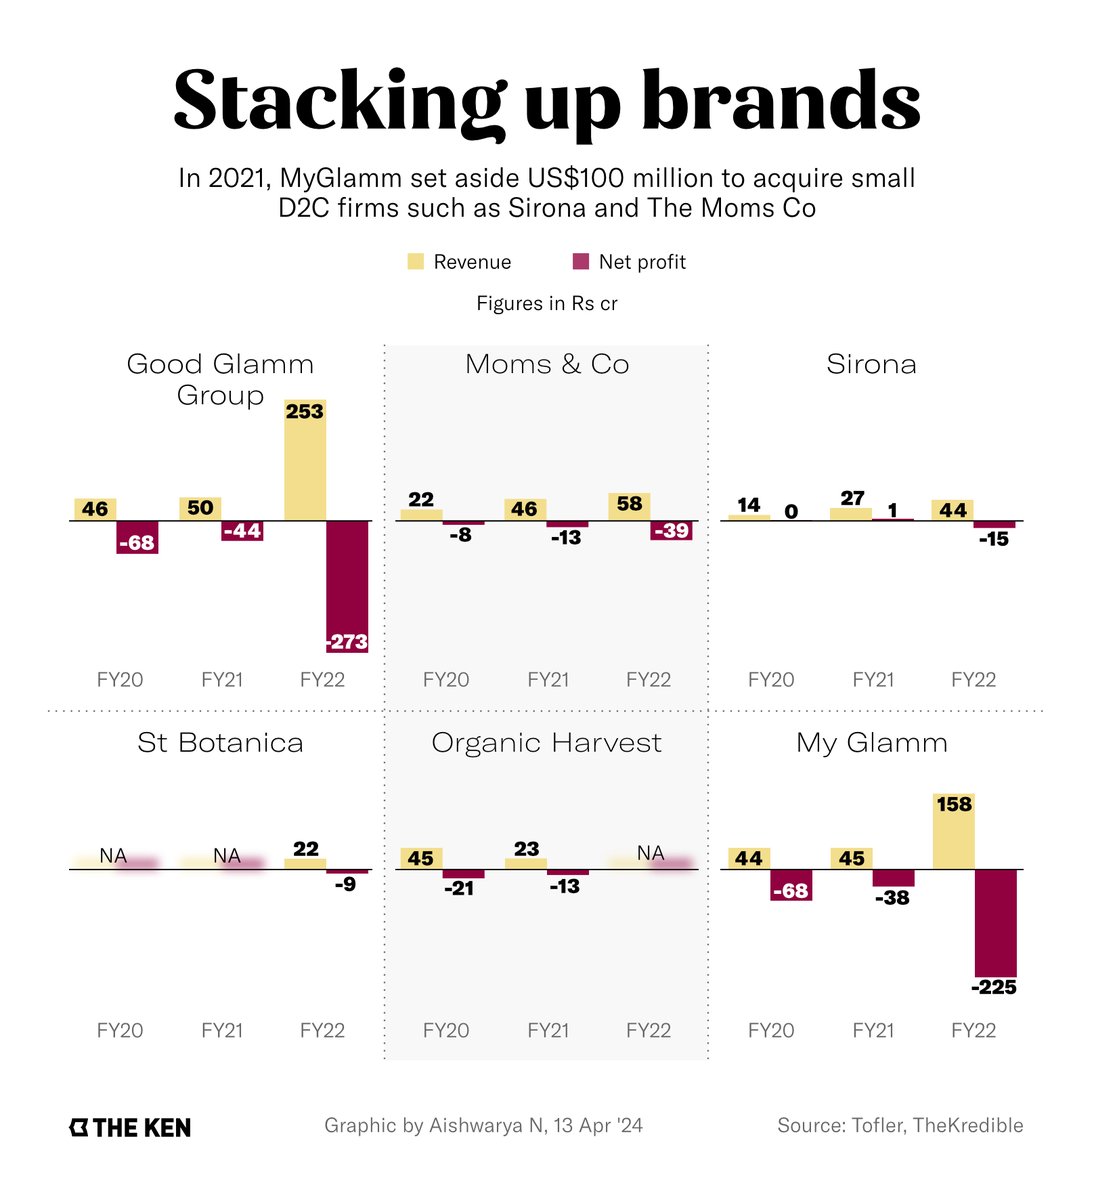 Good Glamm can’t keep up with its acquisition spree. The $1.2 billion firm––backed by investors like Prosus and Amazon––acquired over a dozen brands in the fast-money days after the pandemic. But its pitch to be a Thrasio-esque house of beauty brands hasn’t really panned out.